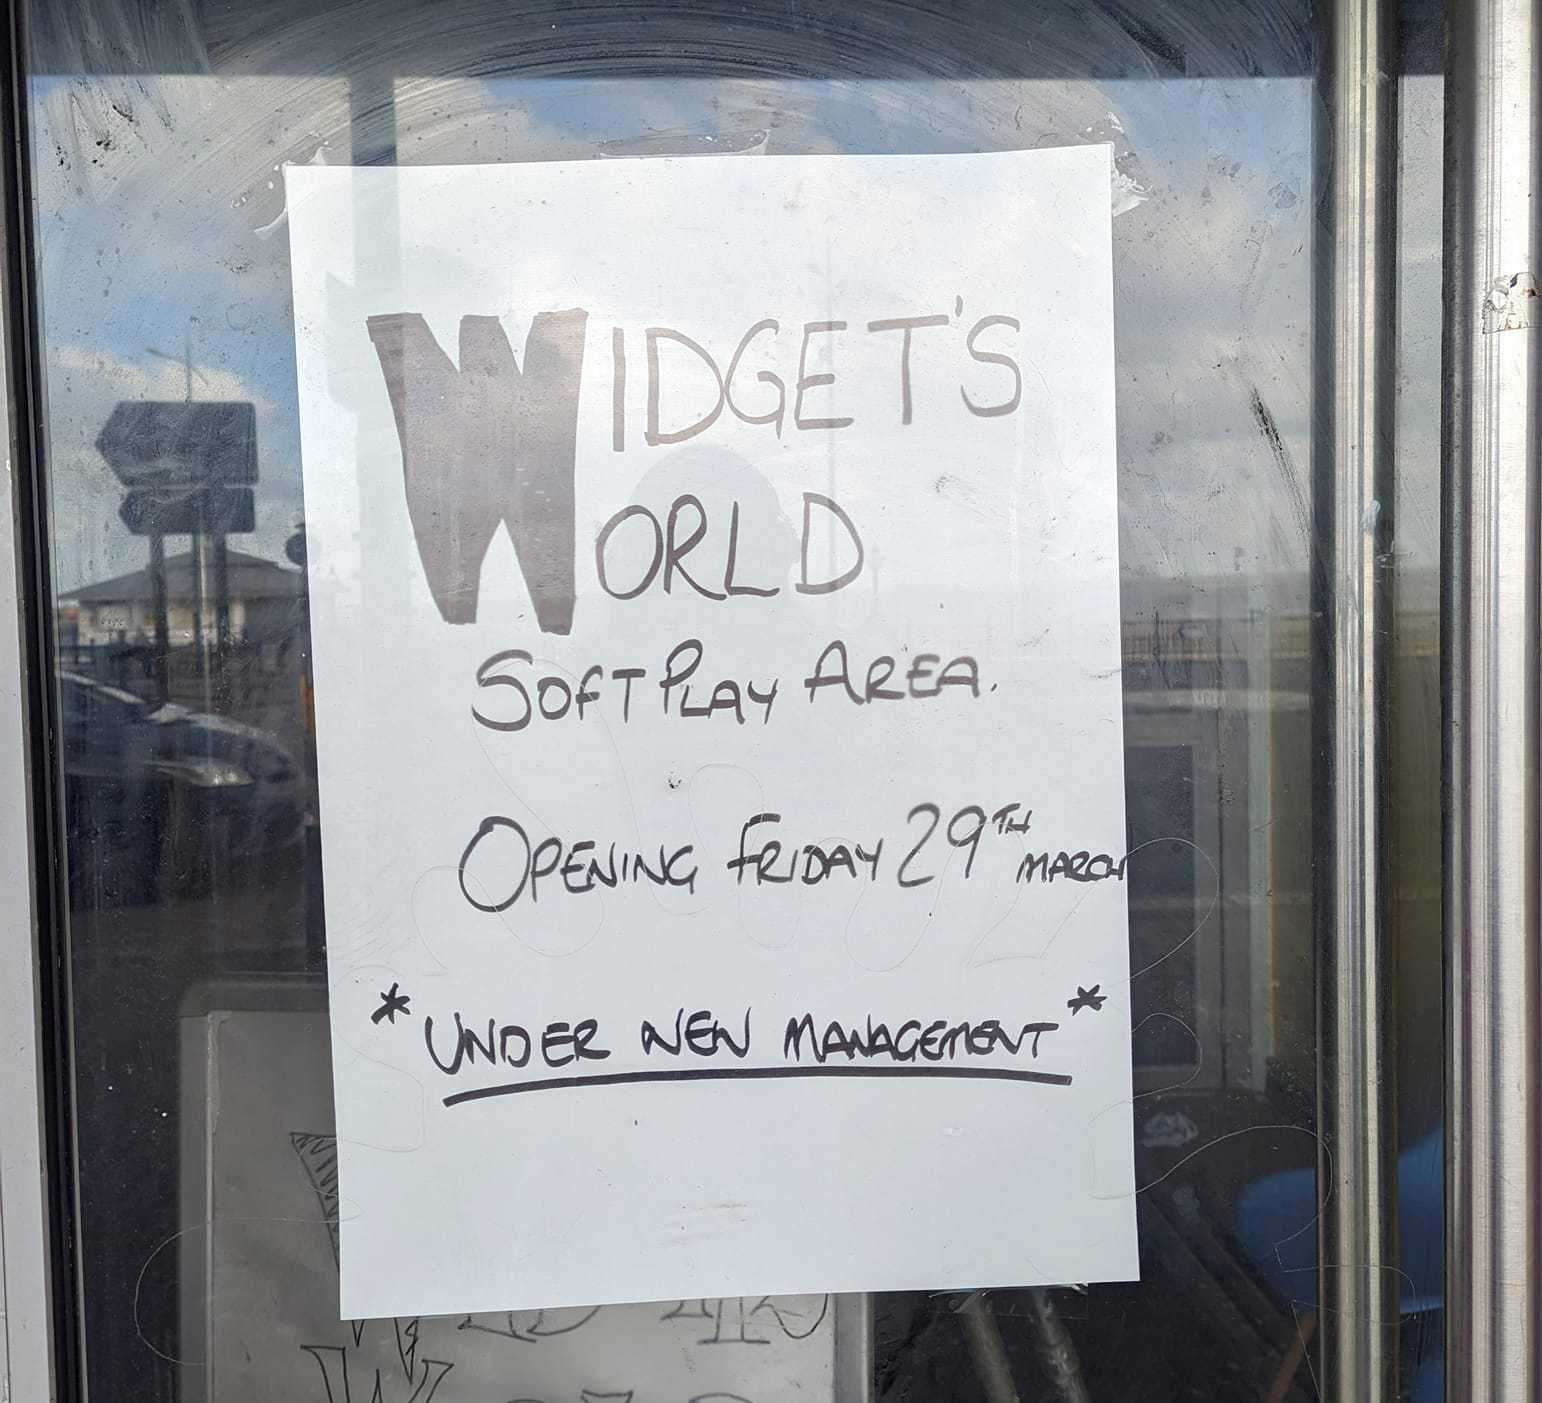 Widget's World will open at the former Kids Mayhem in Margate on Good Friday. Picture: Amy Beeching